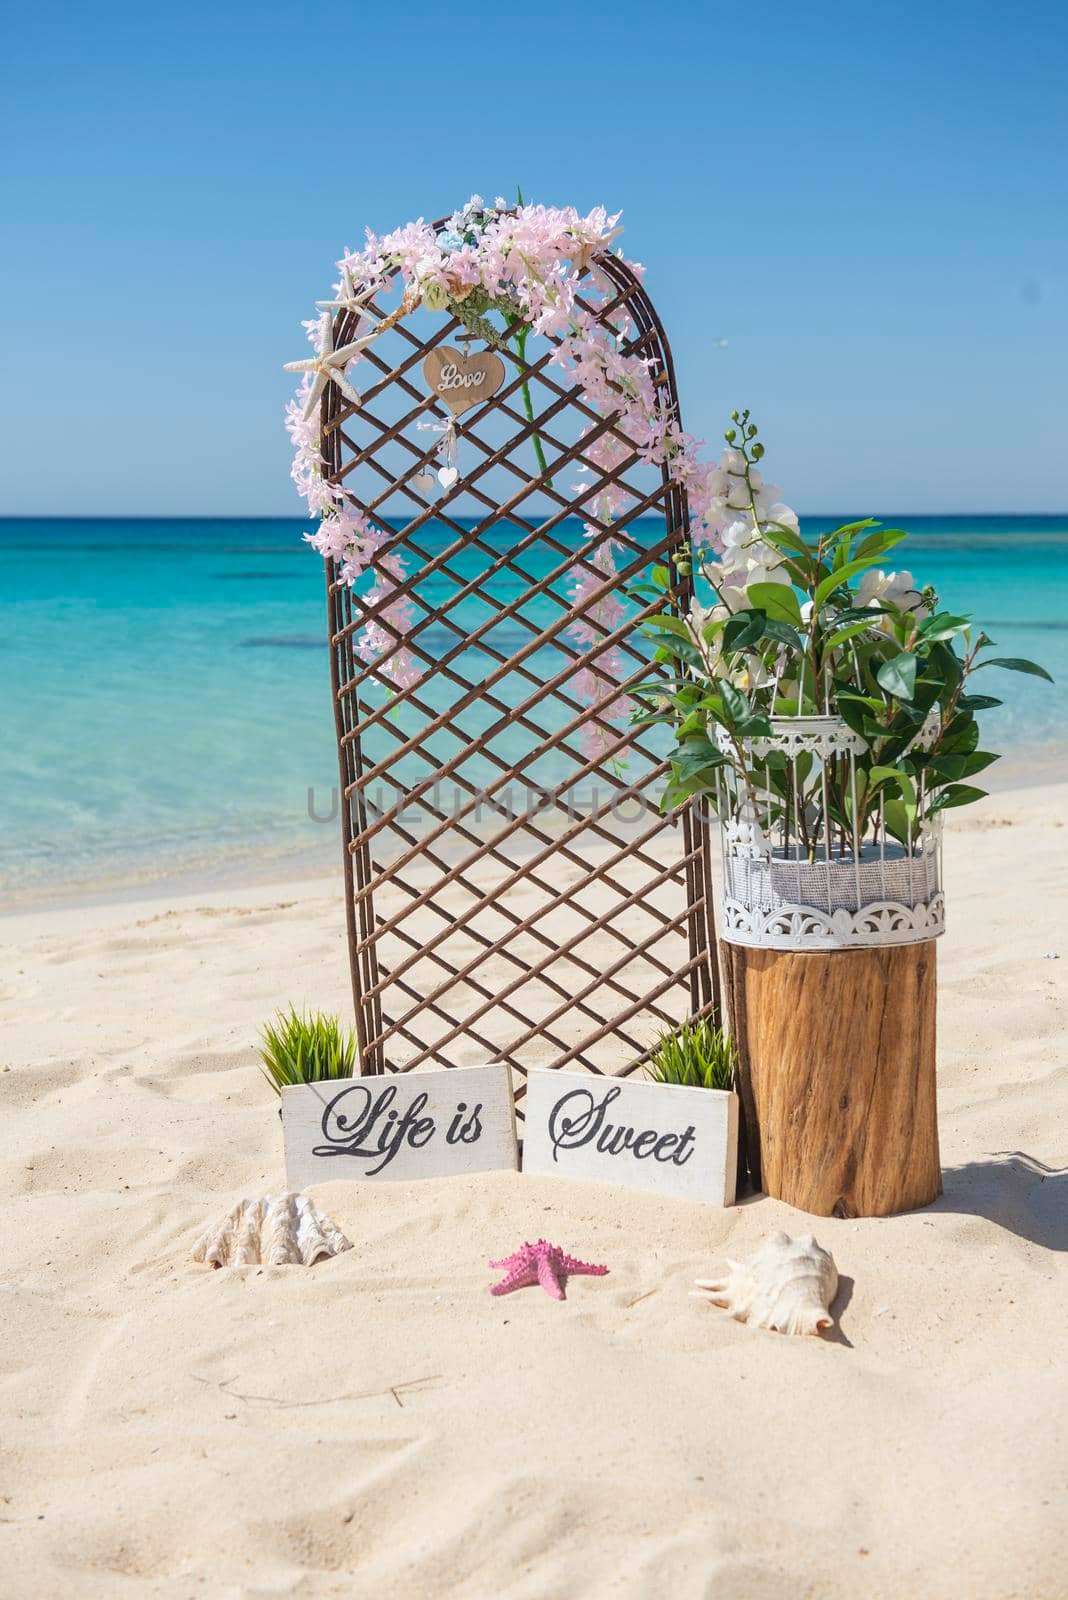 Closeup of wedding sign and decorations on tropical island sandy beach paradise with ocean in background